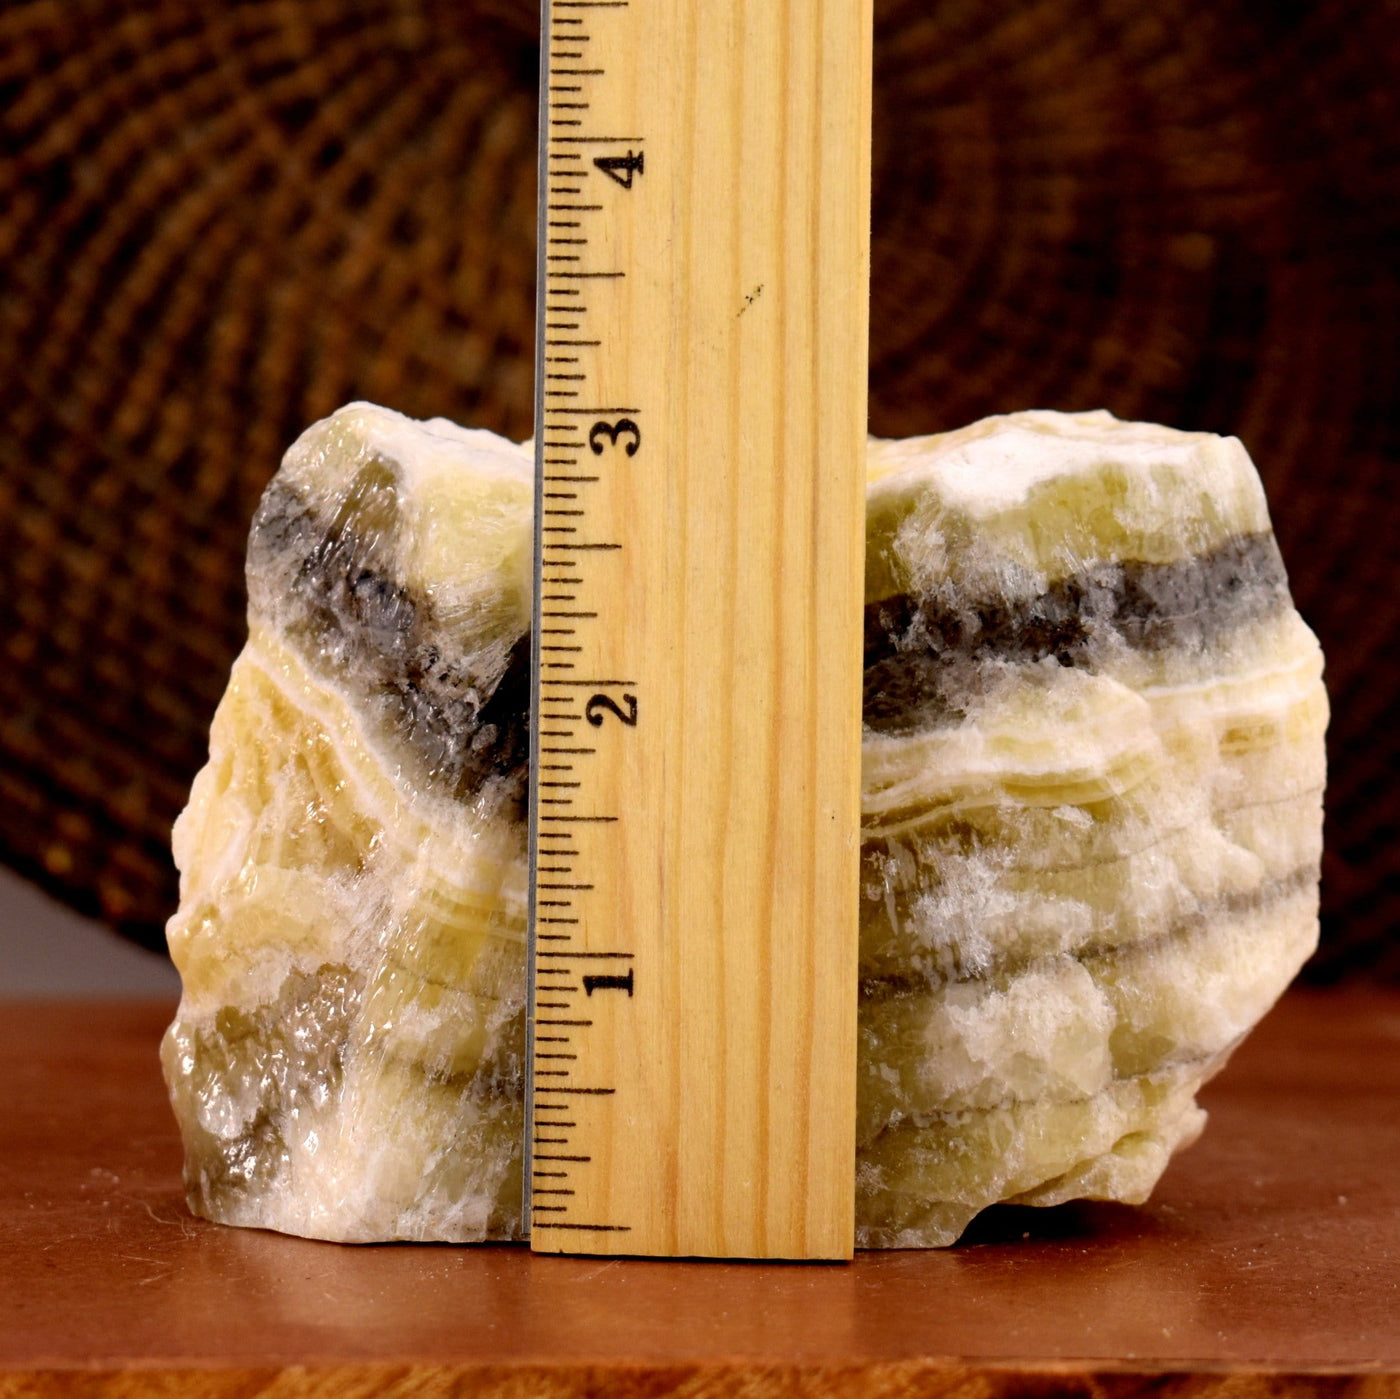 Mexican Onyx Rough Stone next to a ruler for size reference